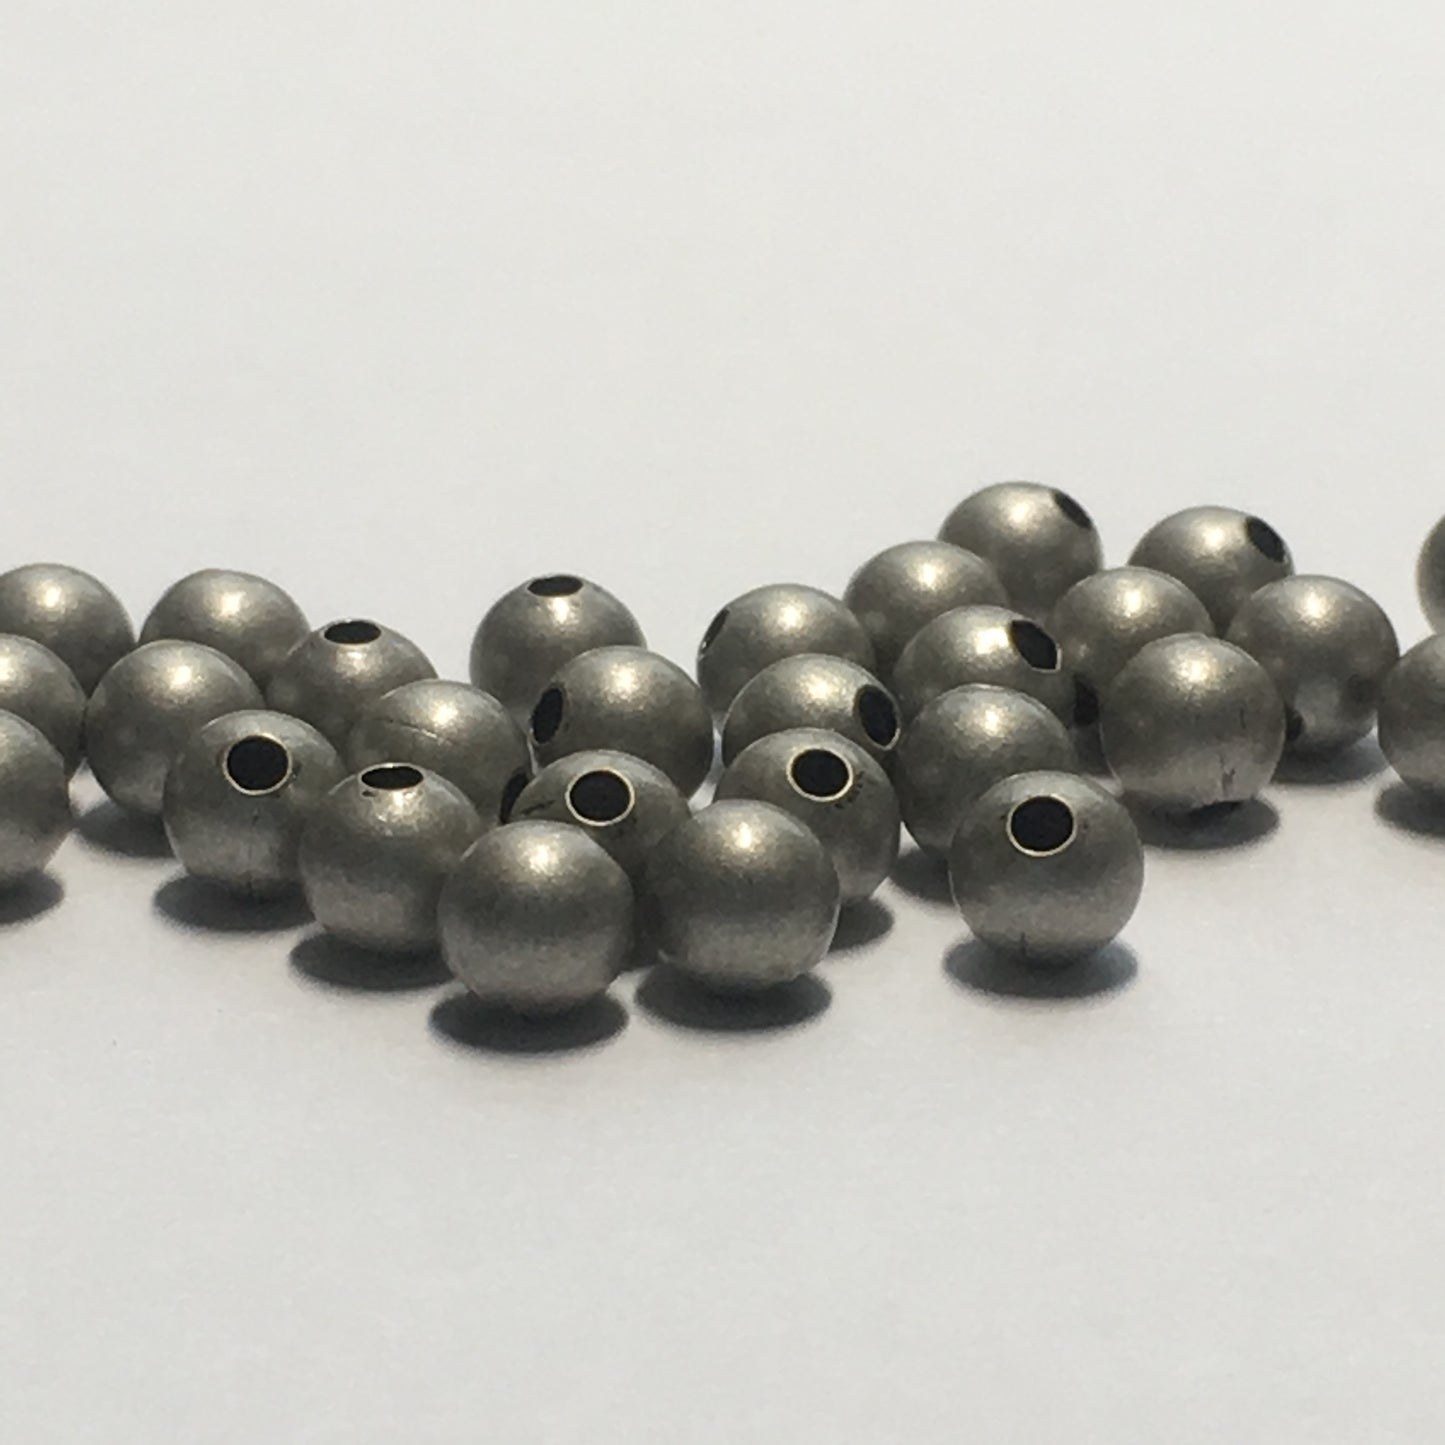 Pewter Finish Smooth Round Beads, 4 mm - 30 Beads